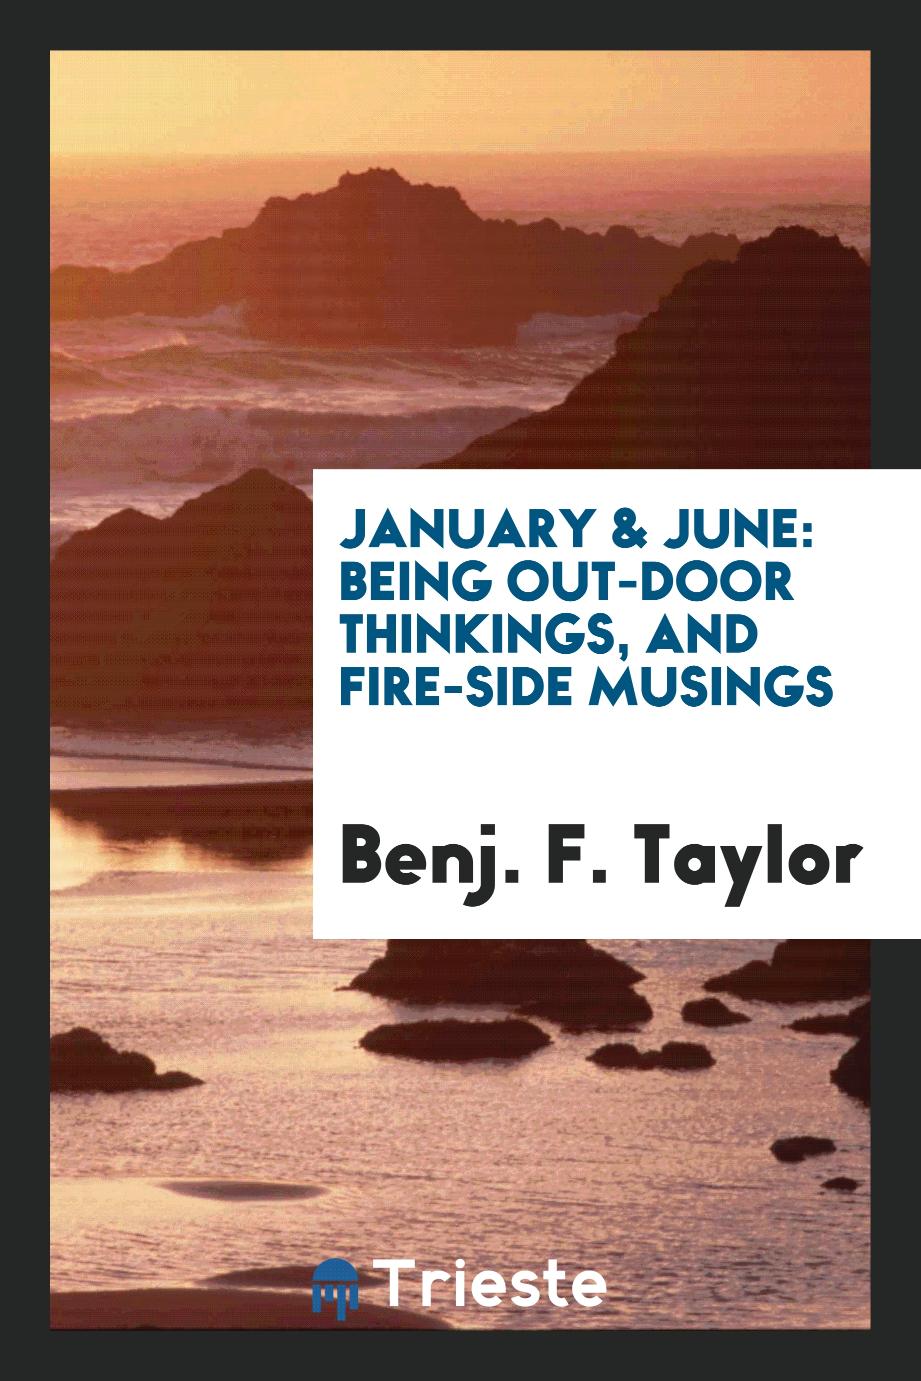 January & June: Being Out-Door Thinkings, and Fire-Side Musings